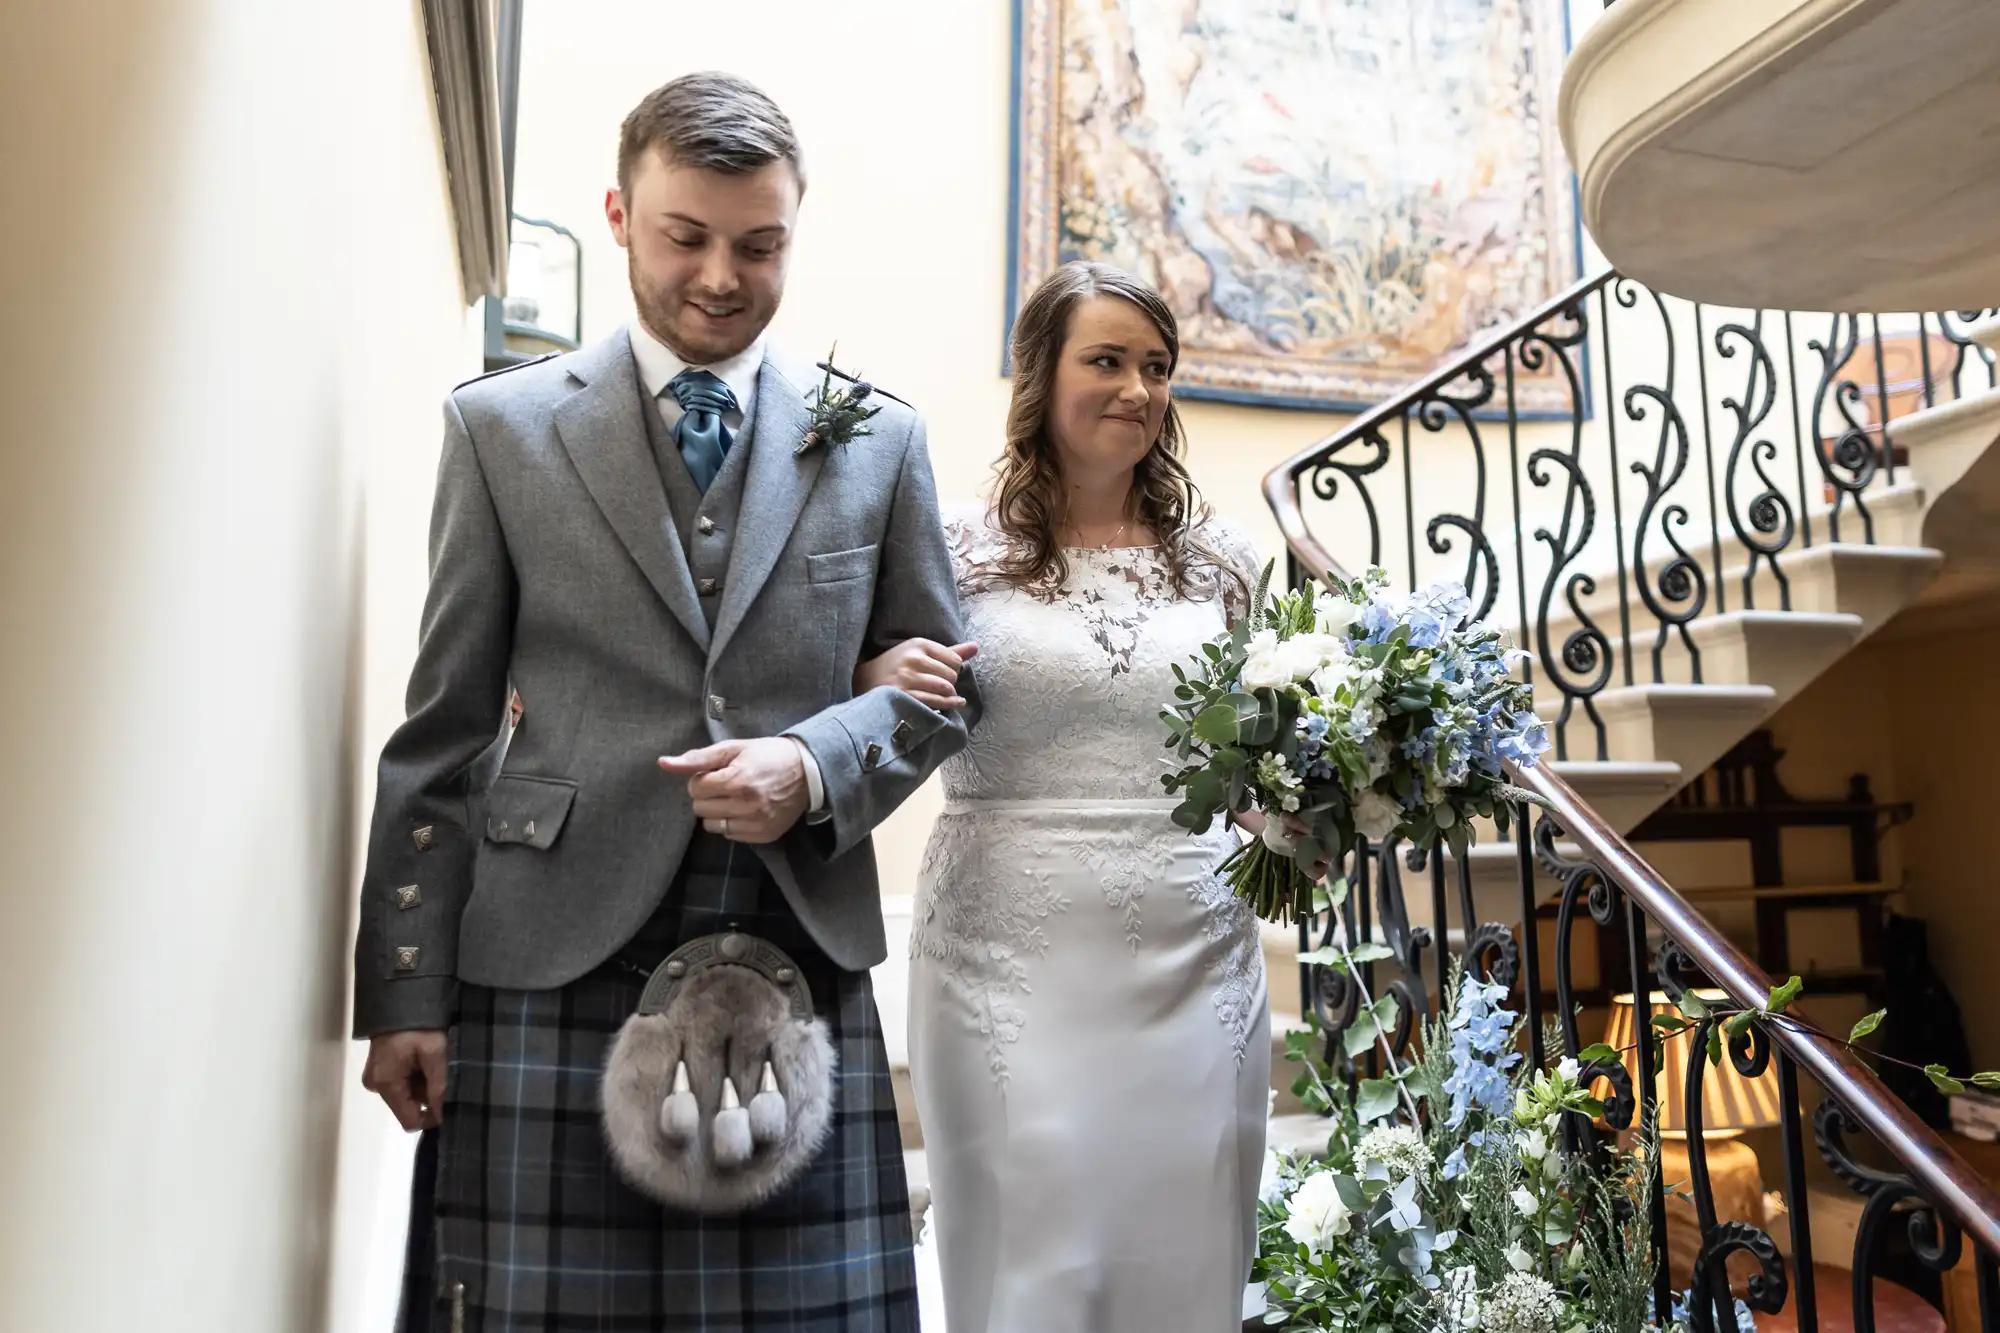 A bride and groom in wedding attire walking down a staircase, the groom in a kilt and the bride holding a bouquet.